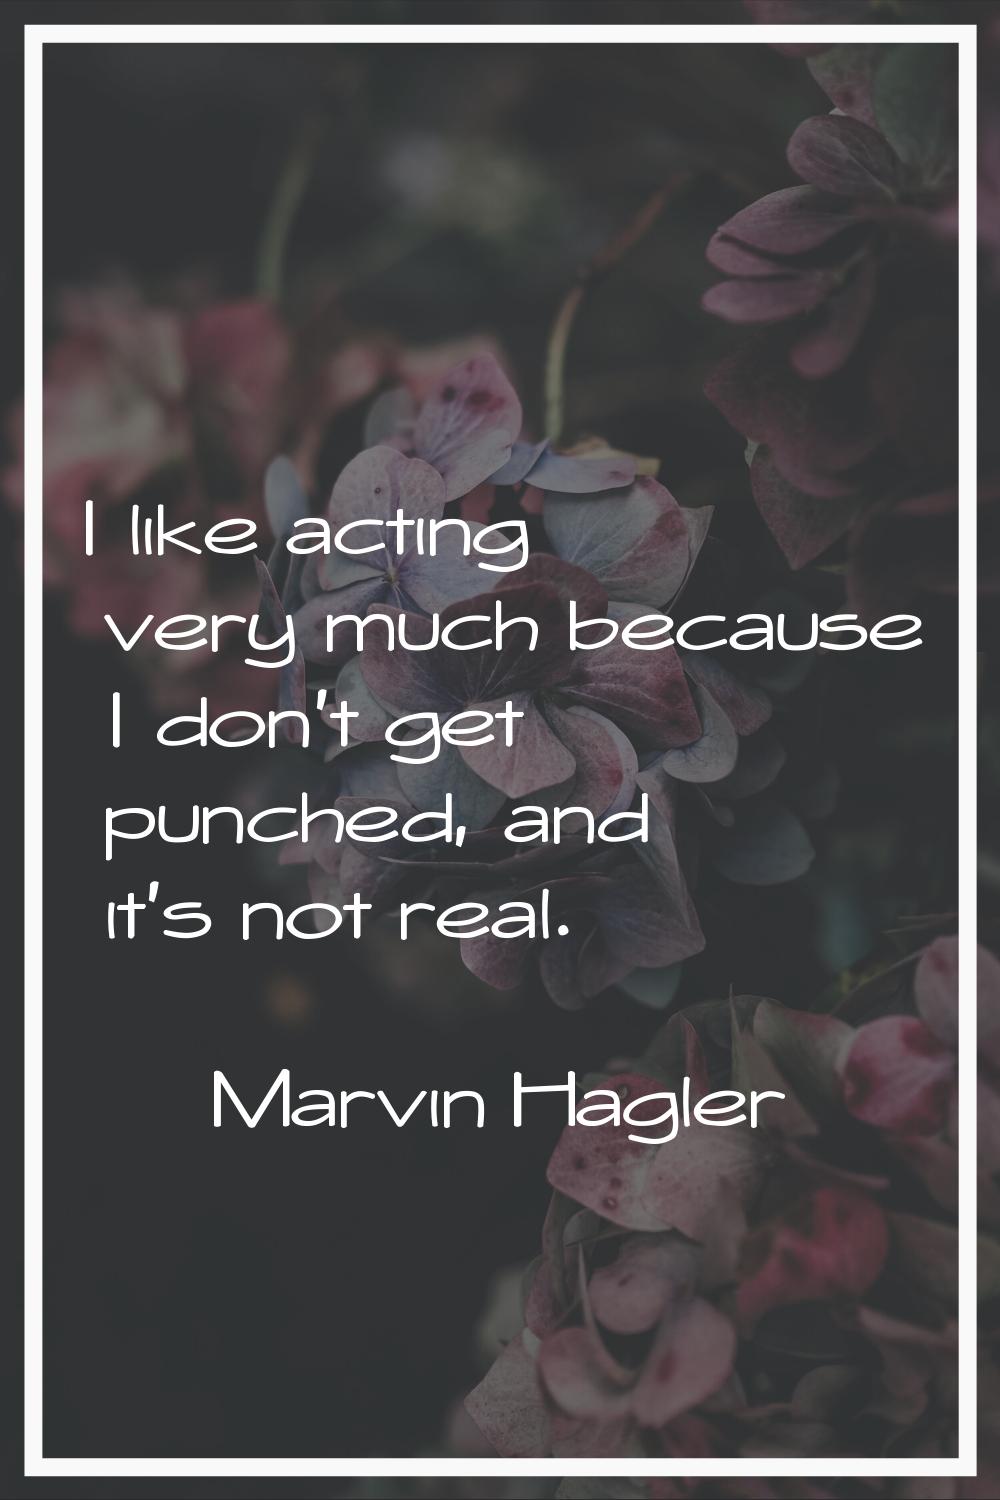 I like acting very much because I don't get punched, and it's not real.